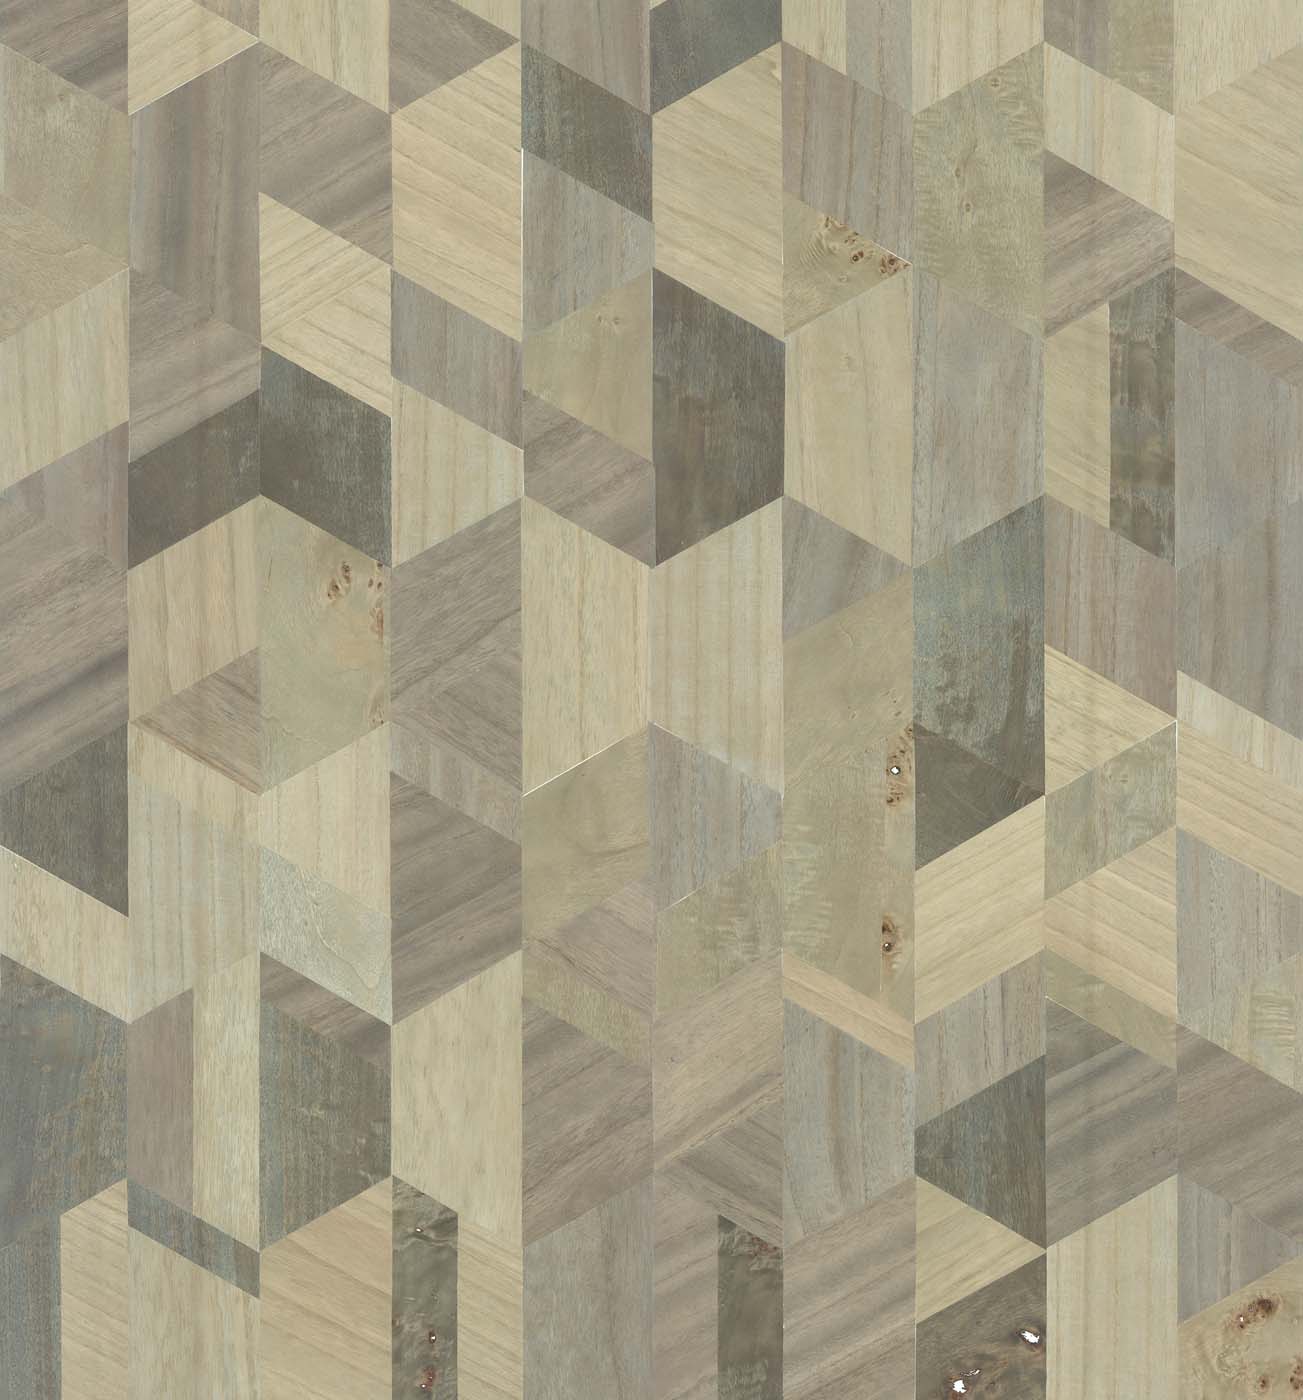 Arte Timber Formation 38202